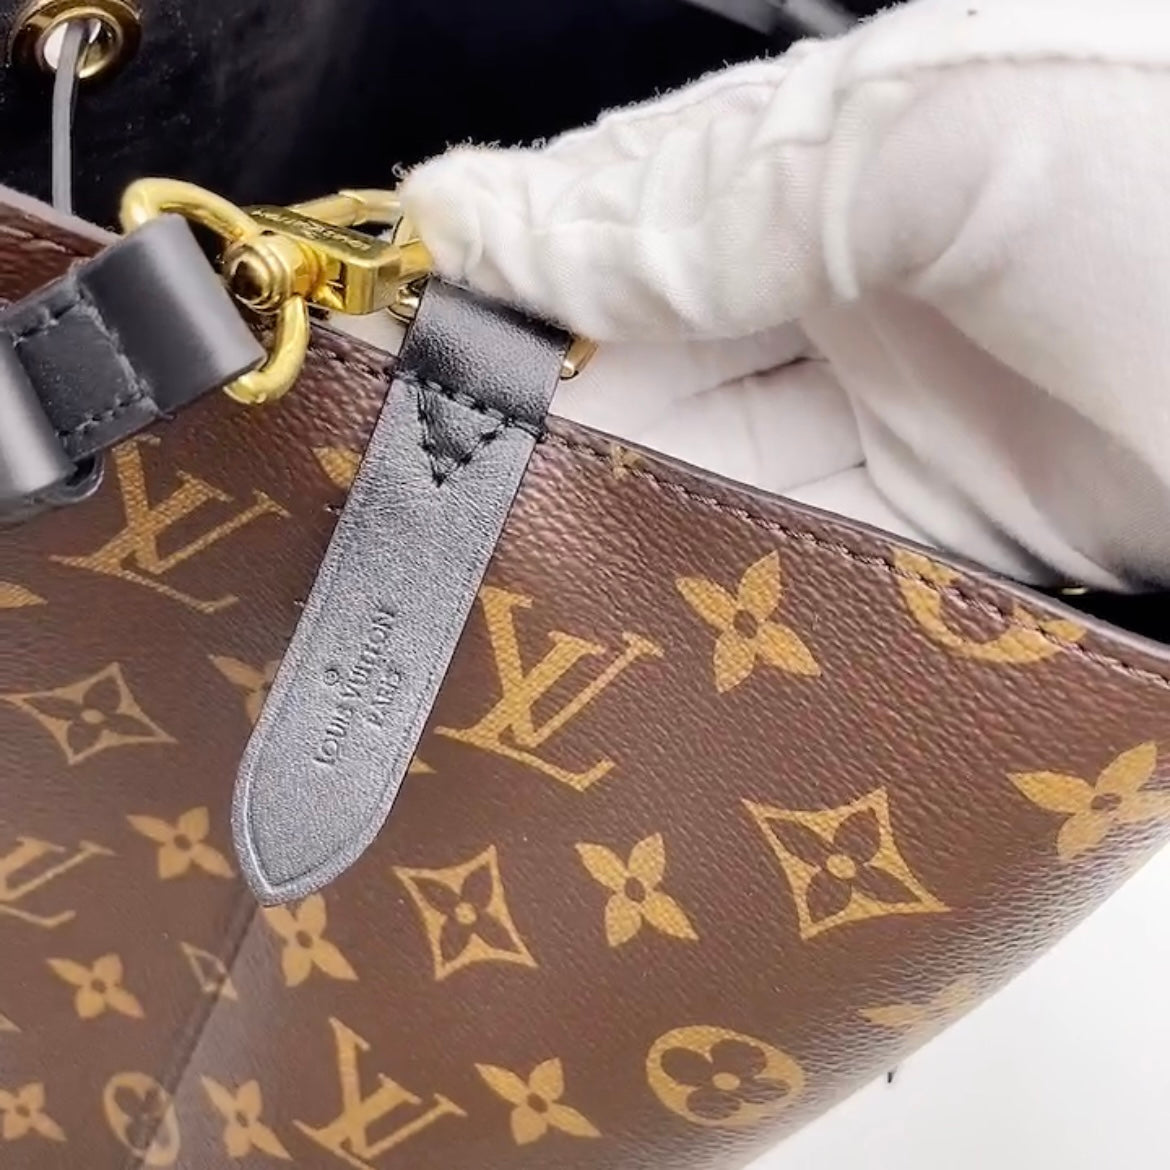 New Microchip In Louis Vuitton Bags - Everything You NEED To Know